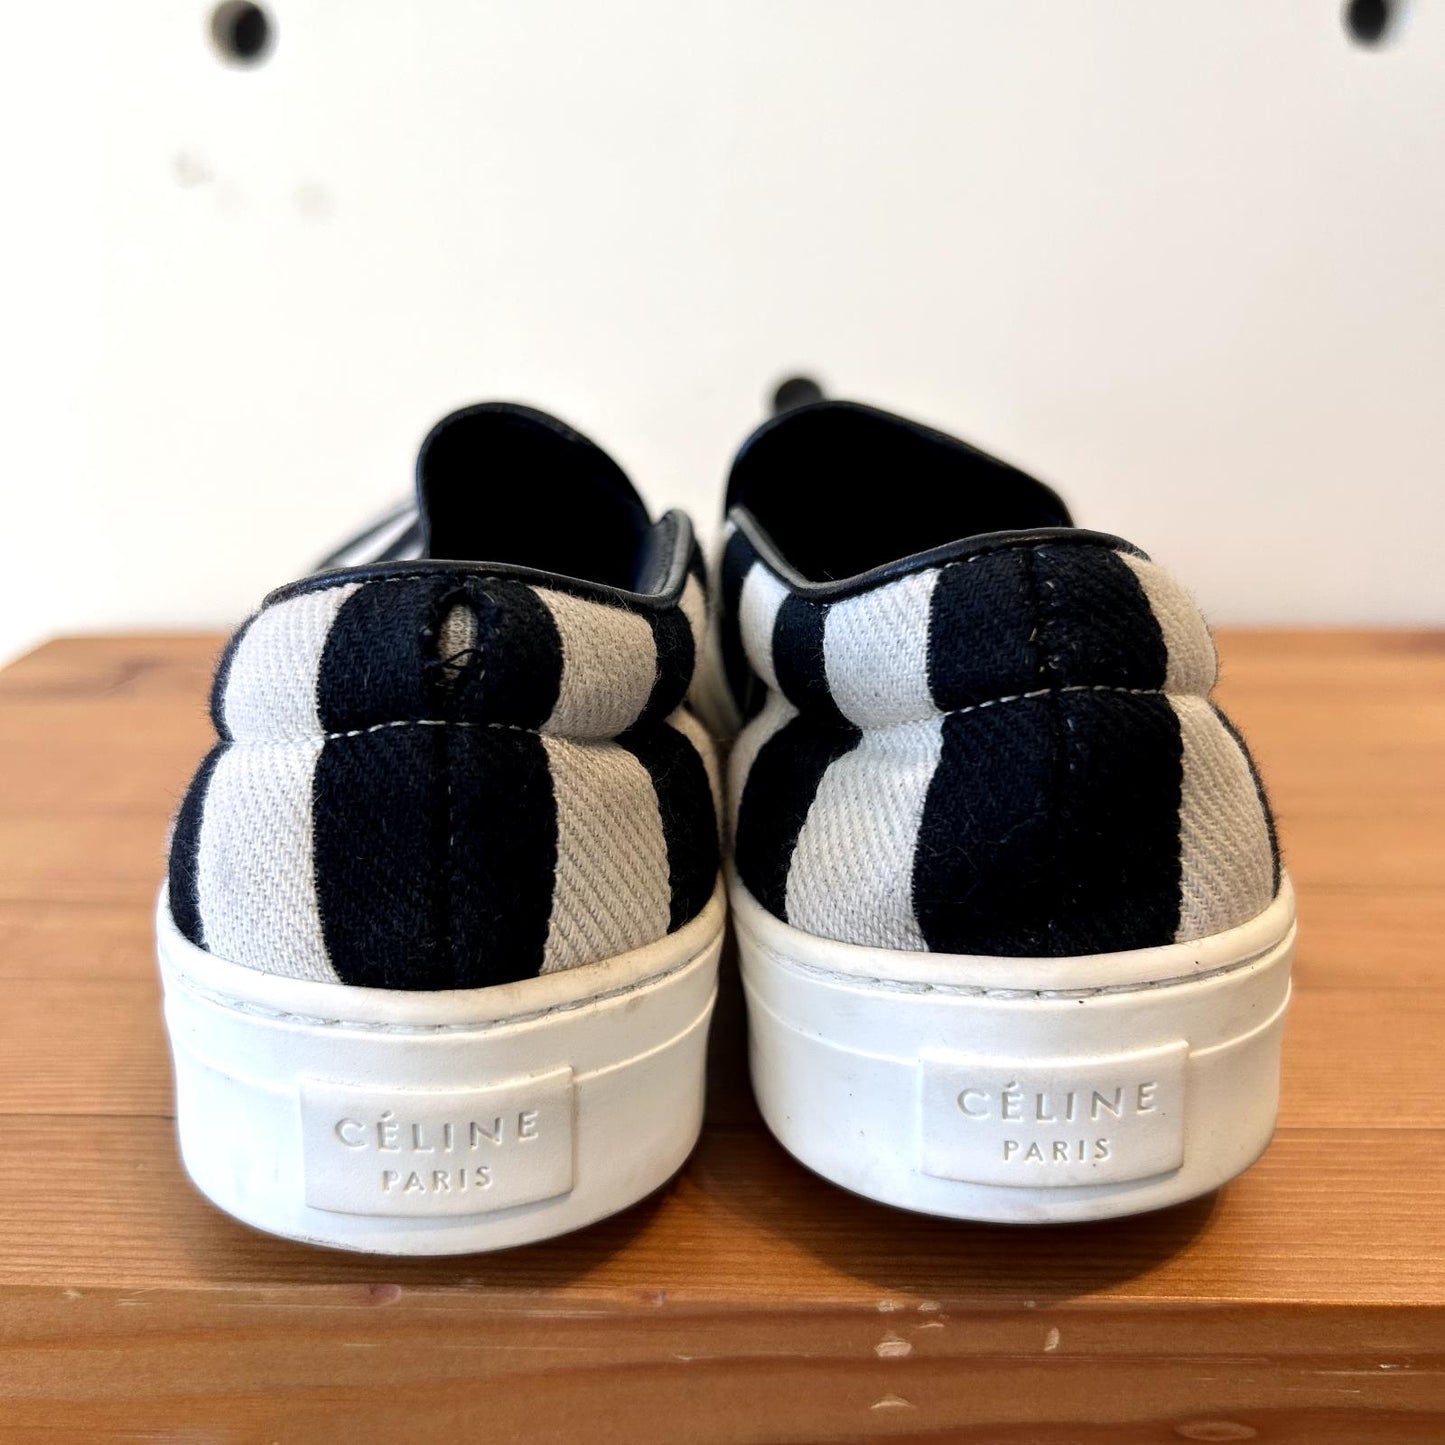 36 / 6 US - Celine Black & White Striped Canvas Slip On Sneakers Shoes 0307MD